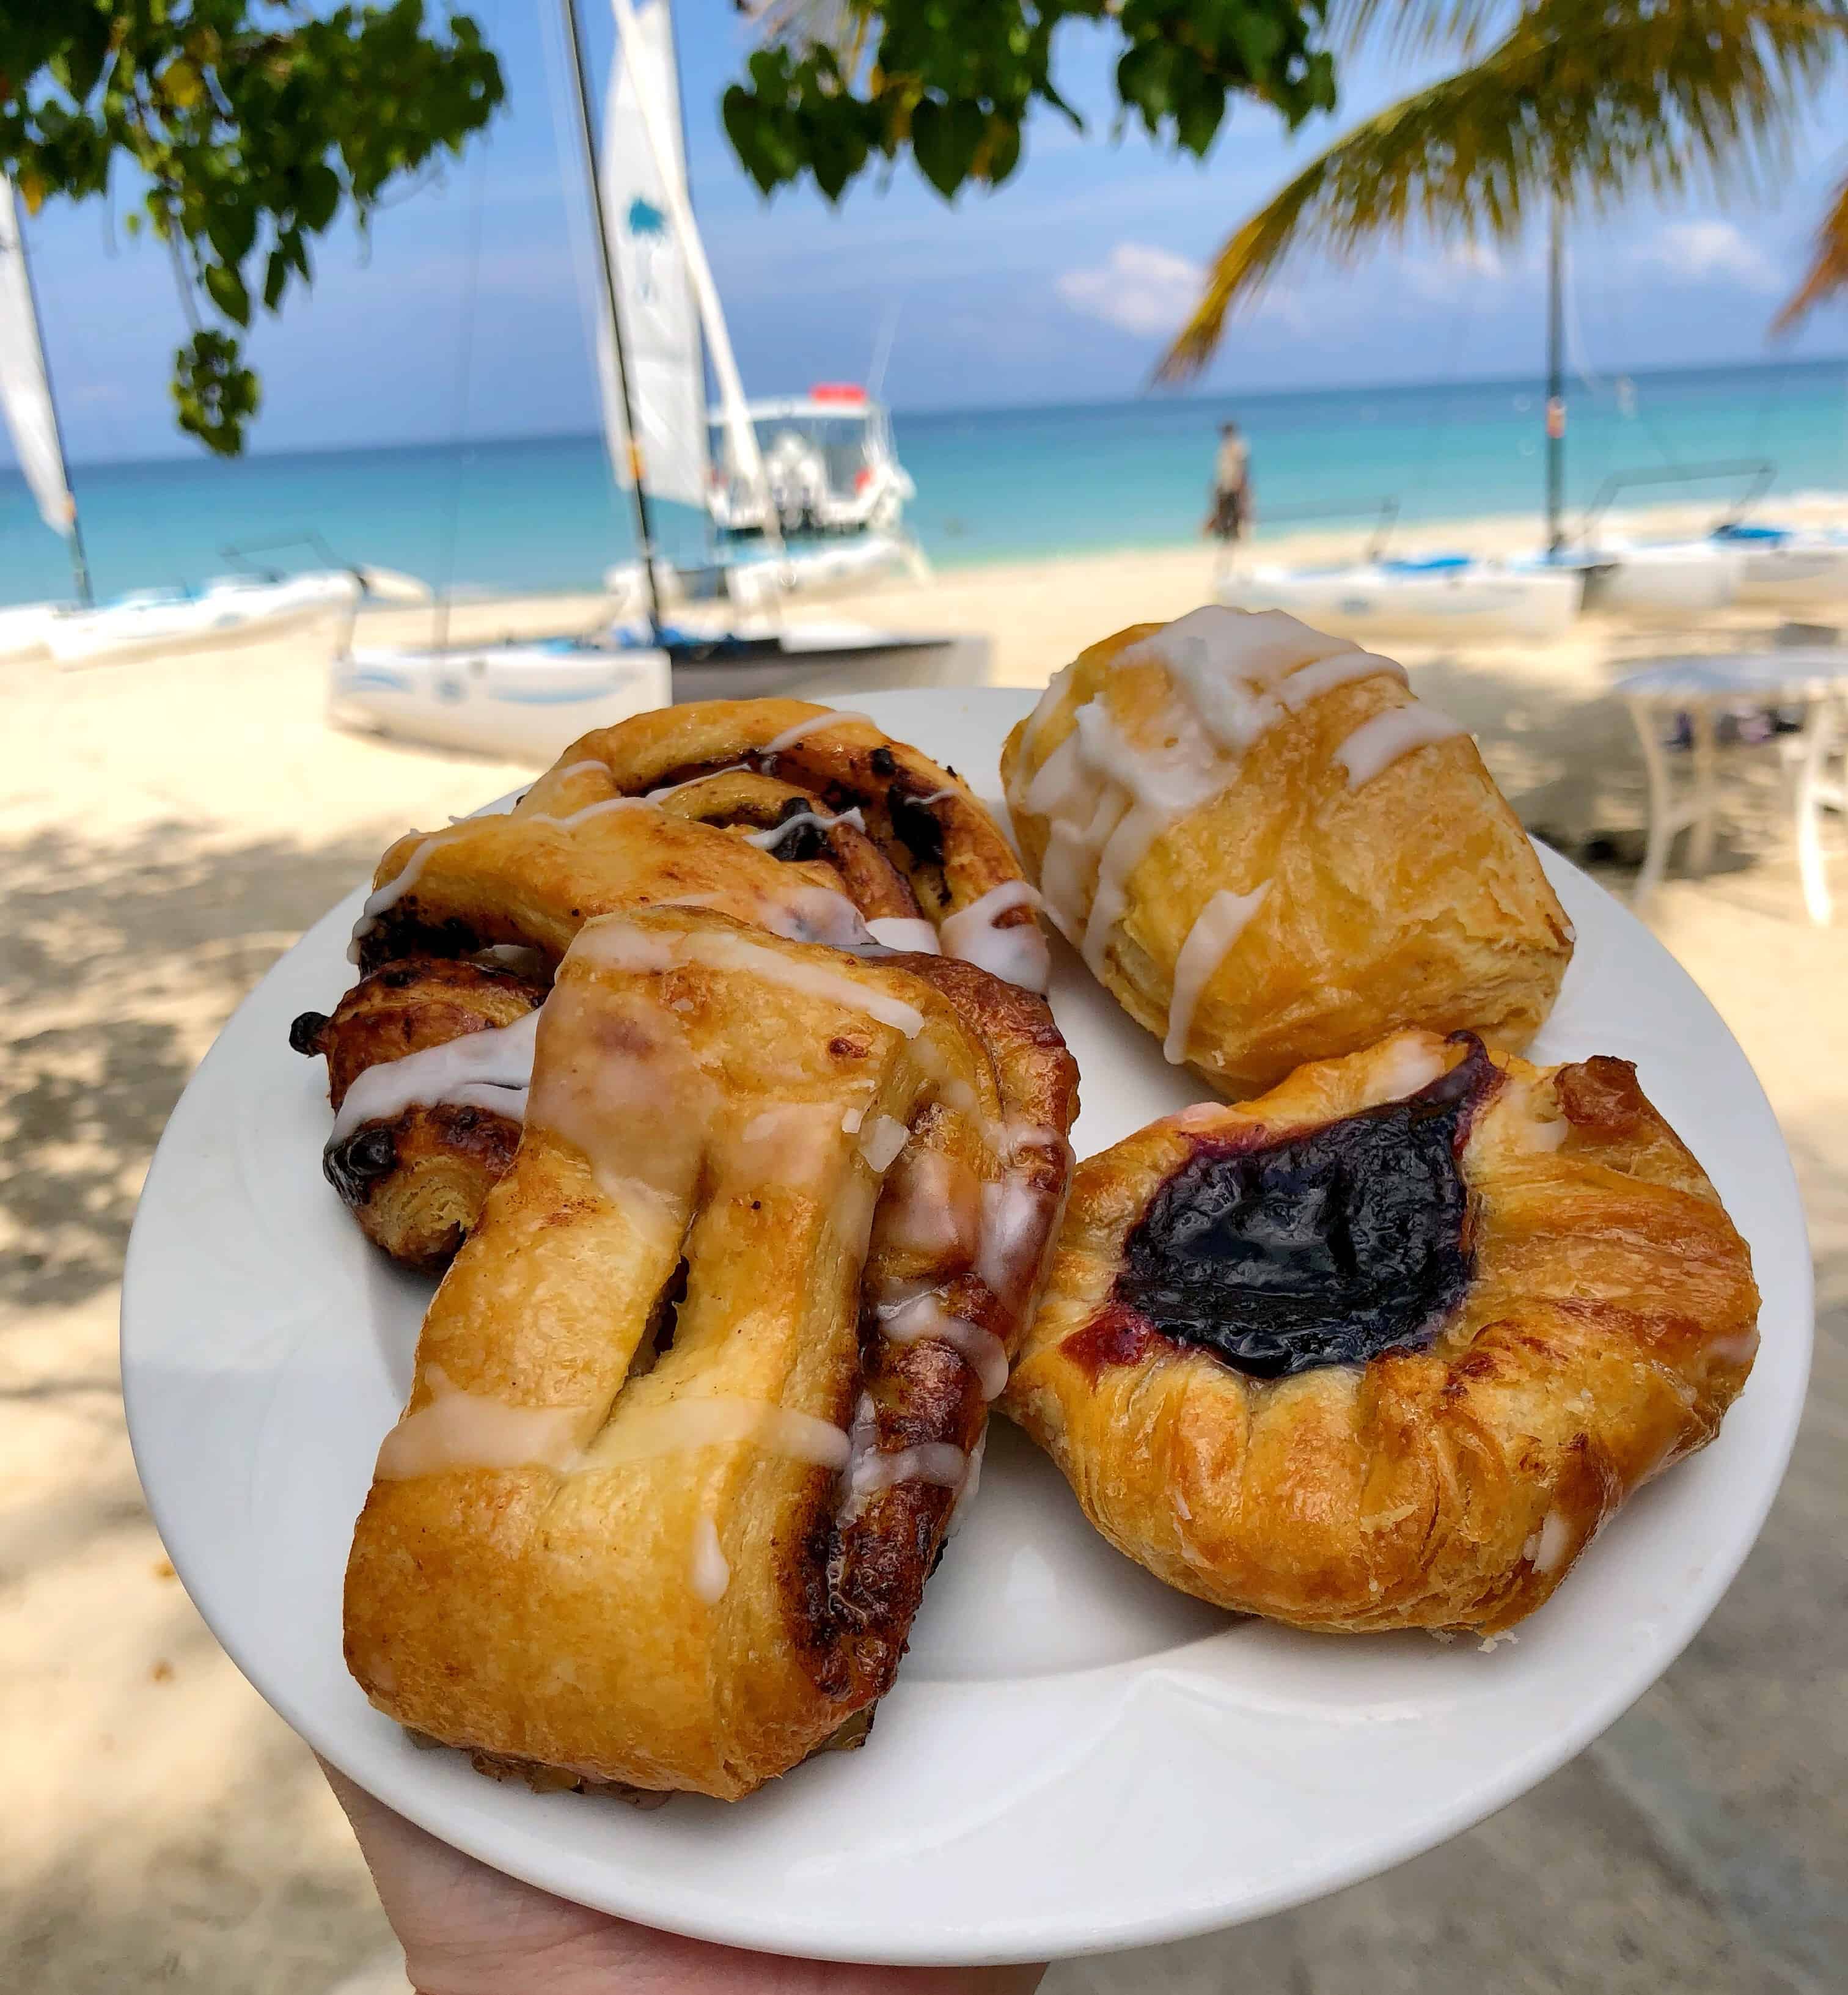 Fresh pastries at Couples Swept Away in Negril, Jamaica